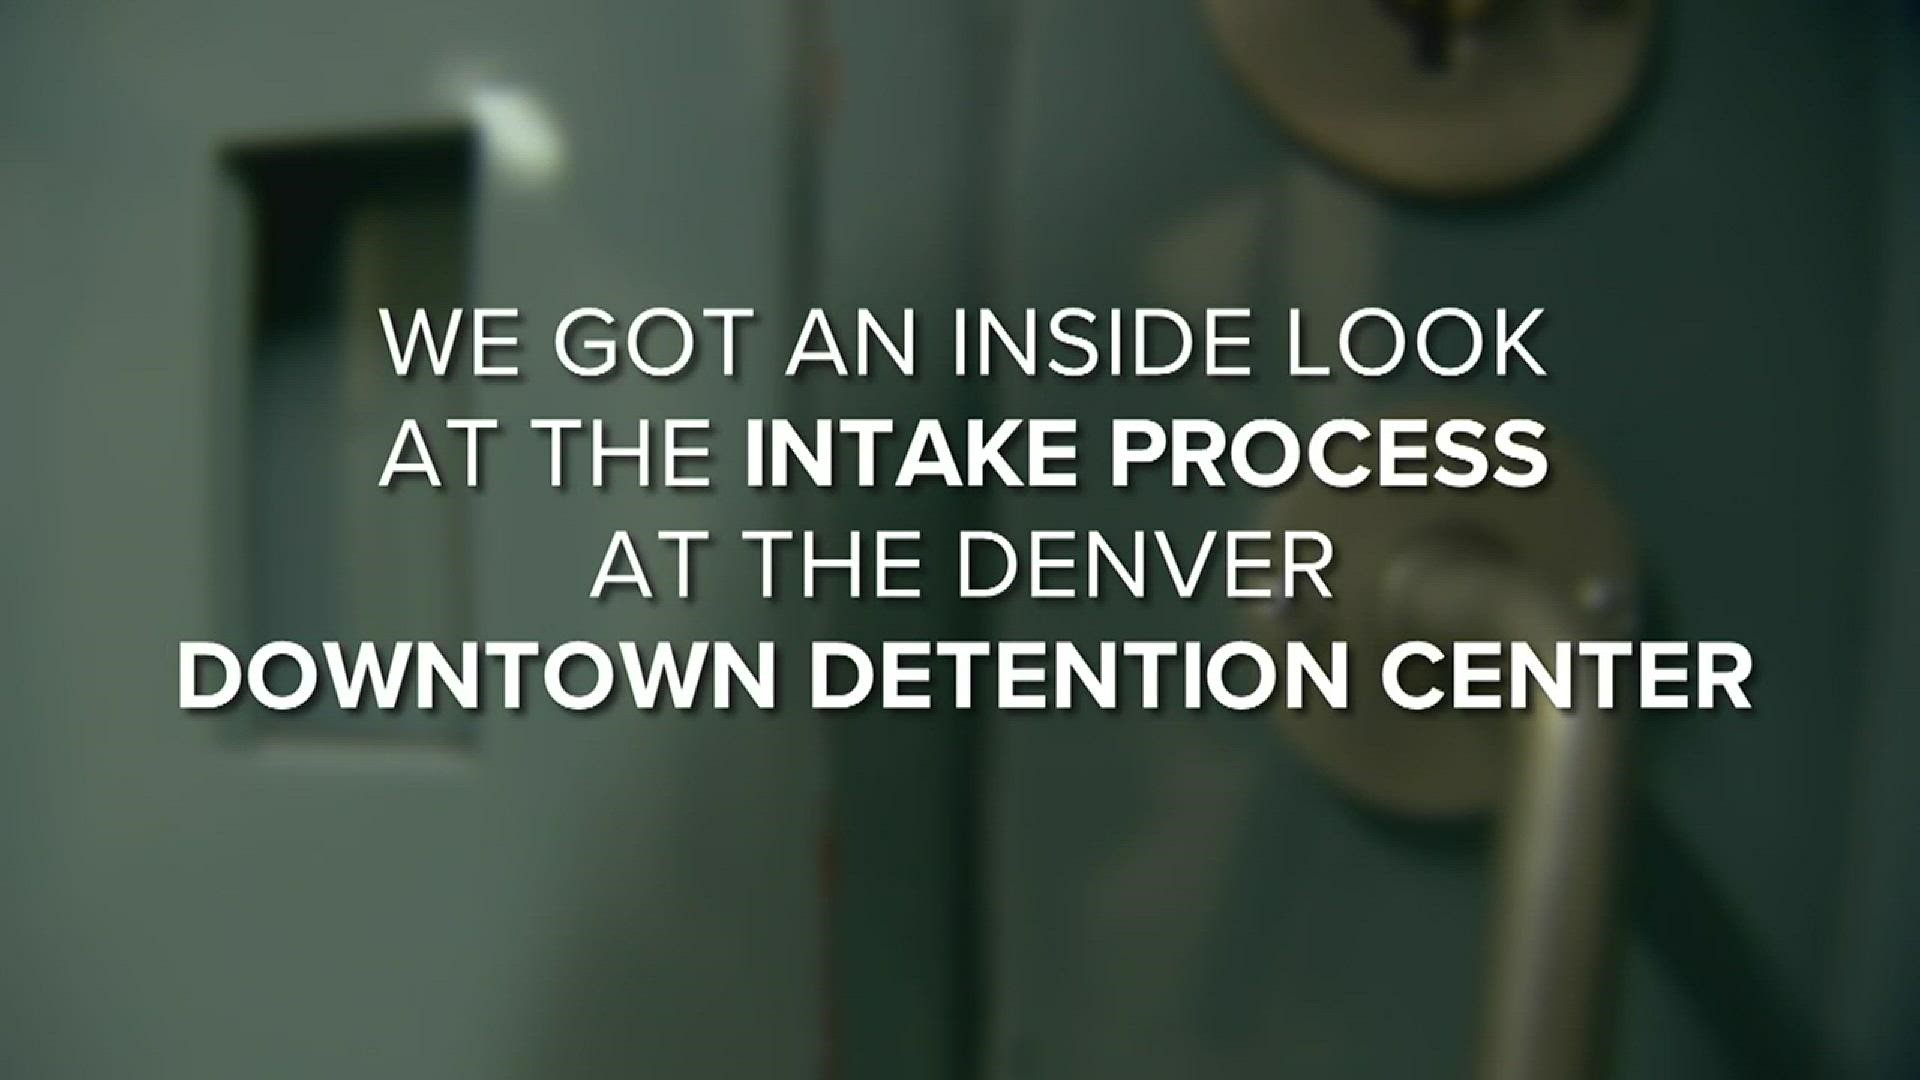 What happens after you get arrested? See what it looks like to go through the intake process at Denver's jail.